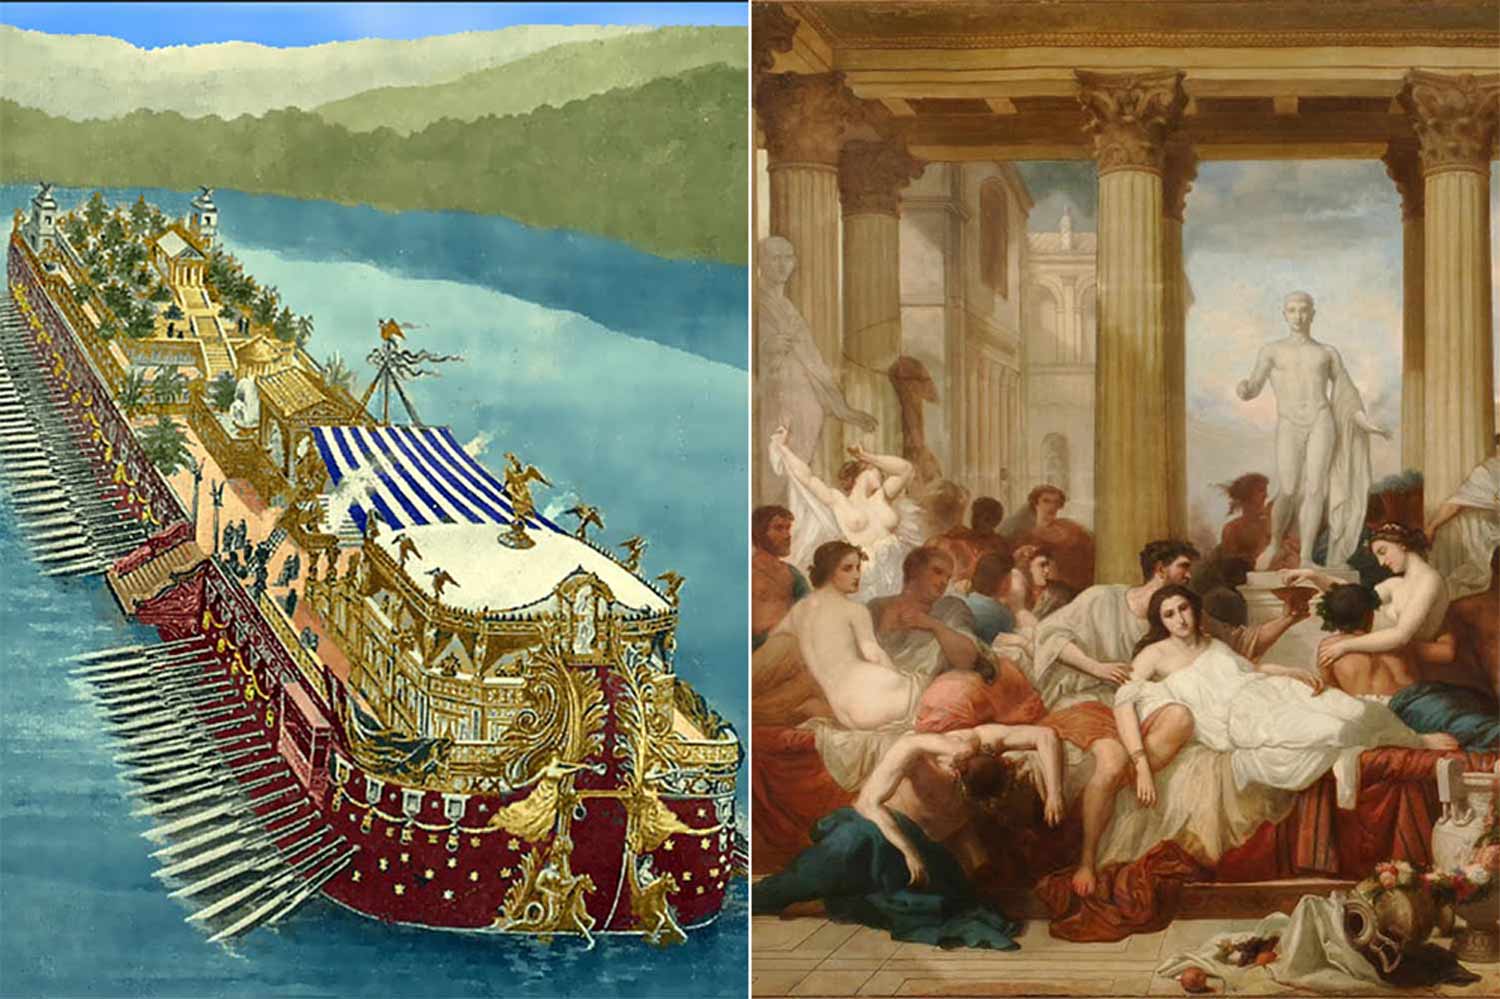 Think Our Superyachts Are Excessive? Check Out This Roman Emperor's